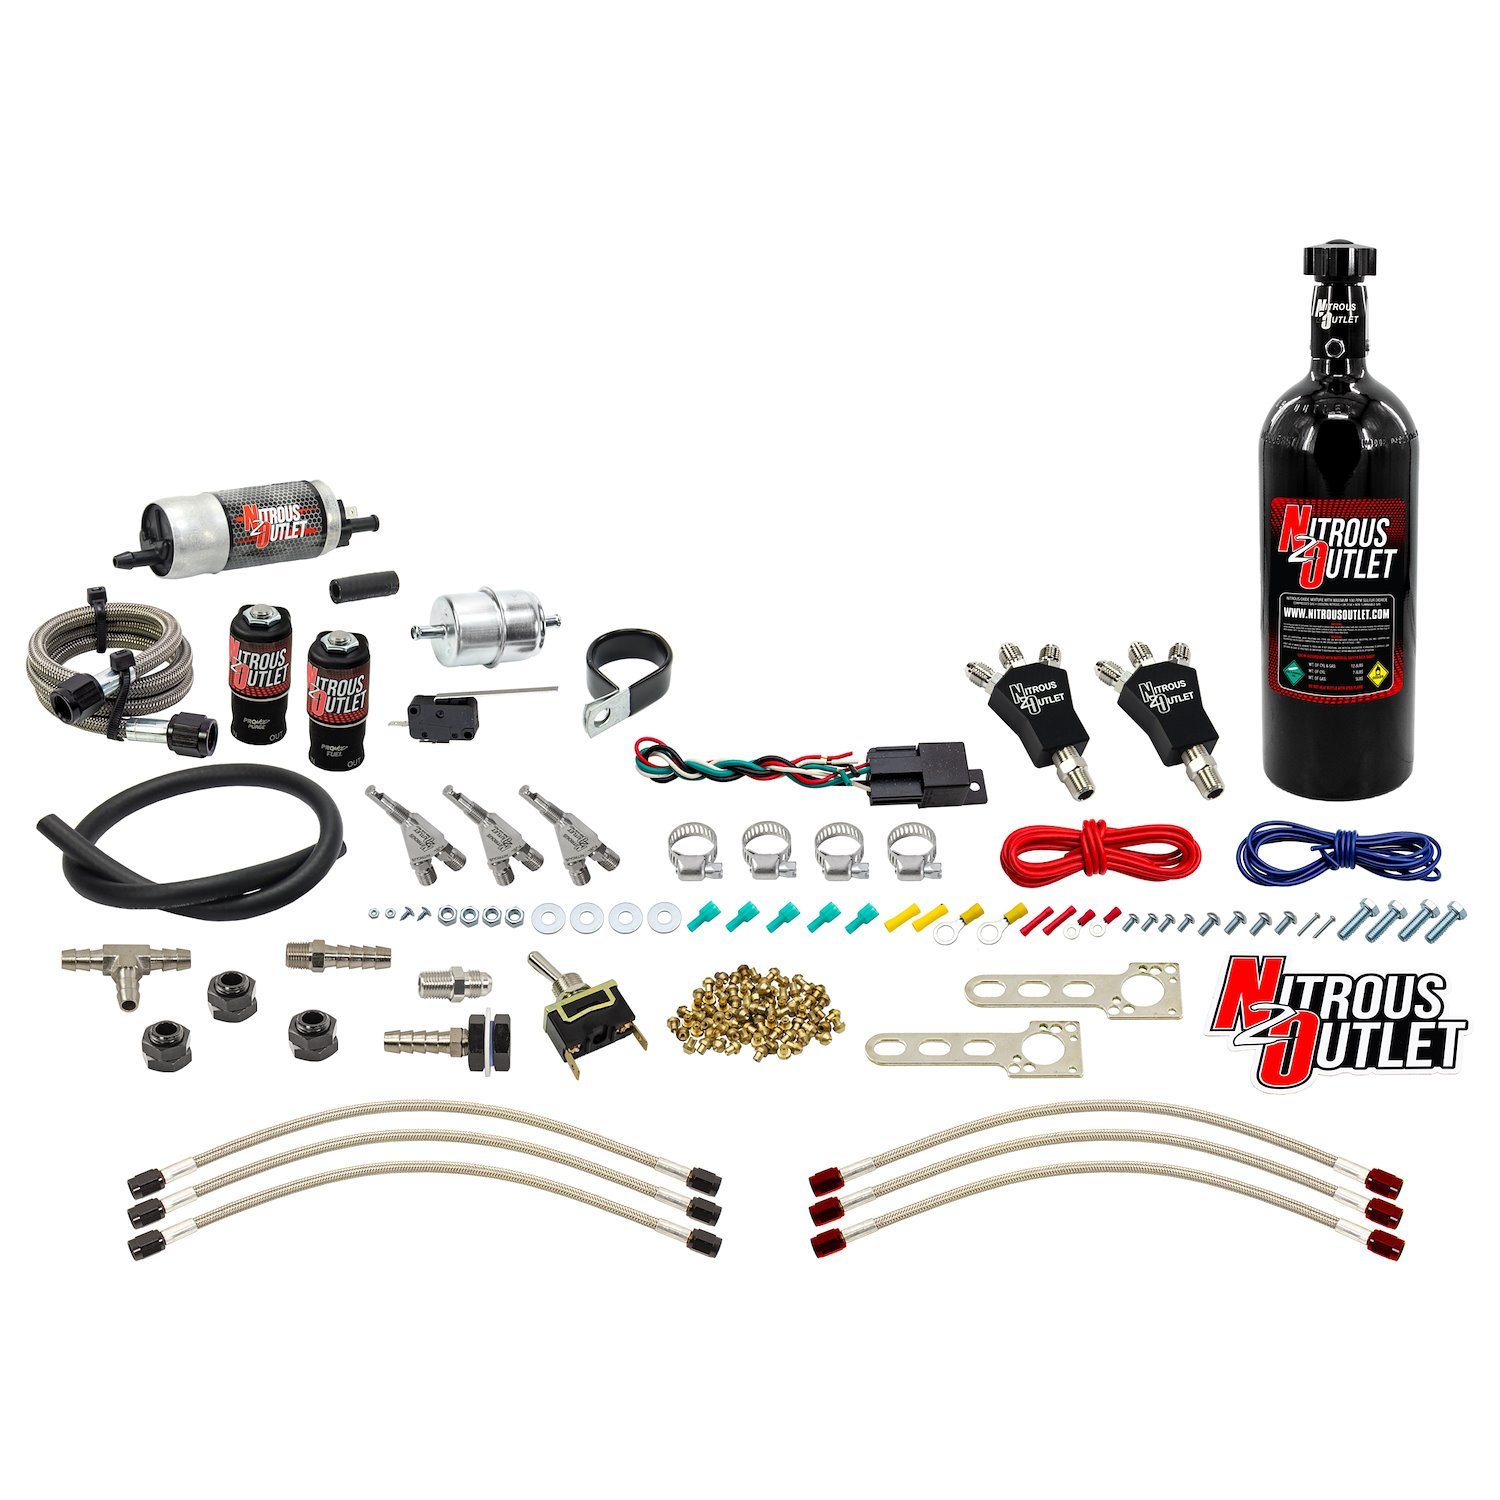 50-10032-5 Powersports 3-Cyl Wet Nozzle System, Stainless 90-Degree Nozzles, Gas, 6 psi, 3045607590 HP, 5LB Bottle